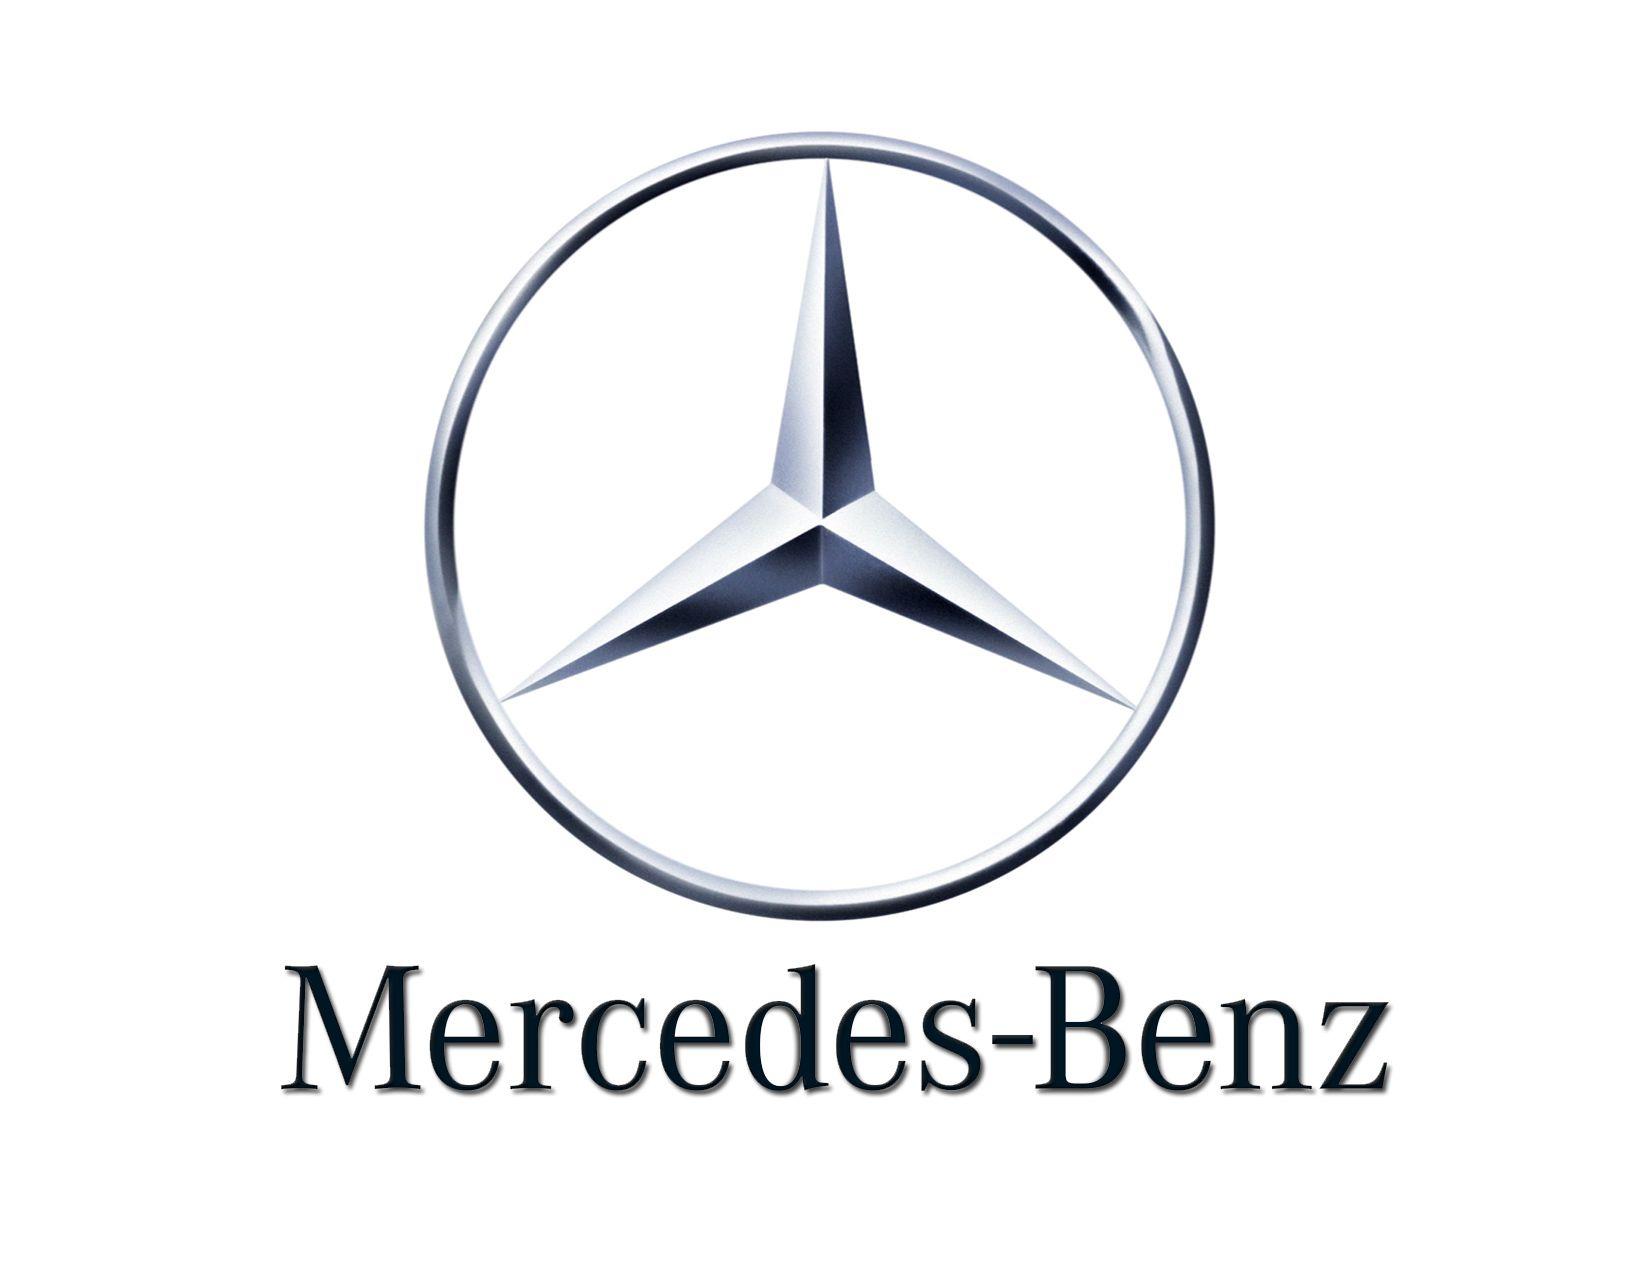 High Quality Mercedes Benz Logo Wallpaper. Full HD Picture